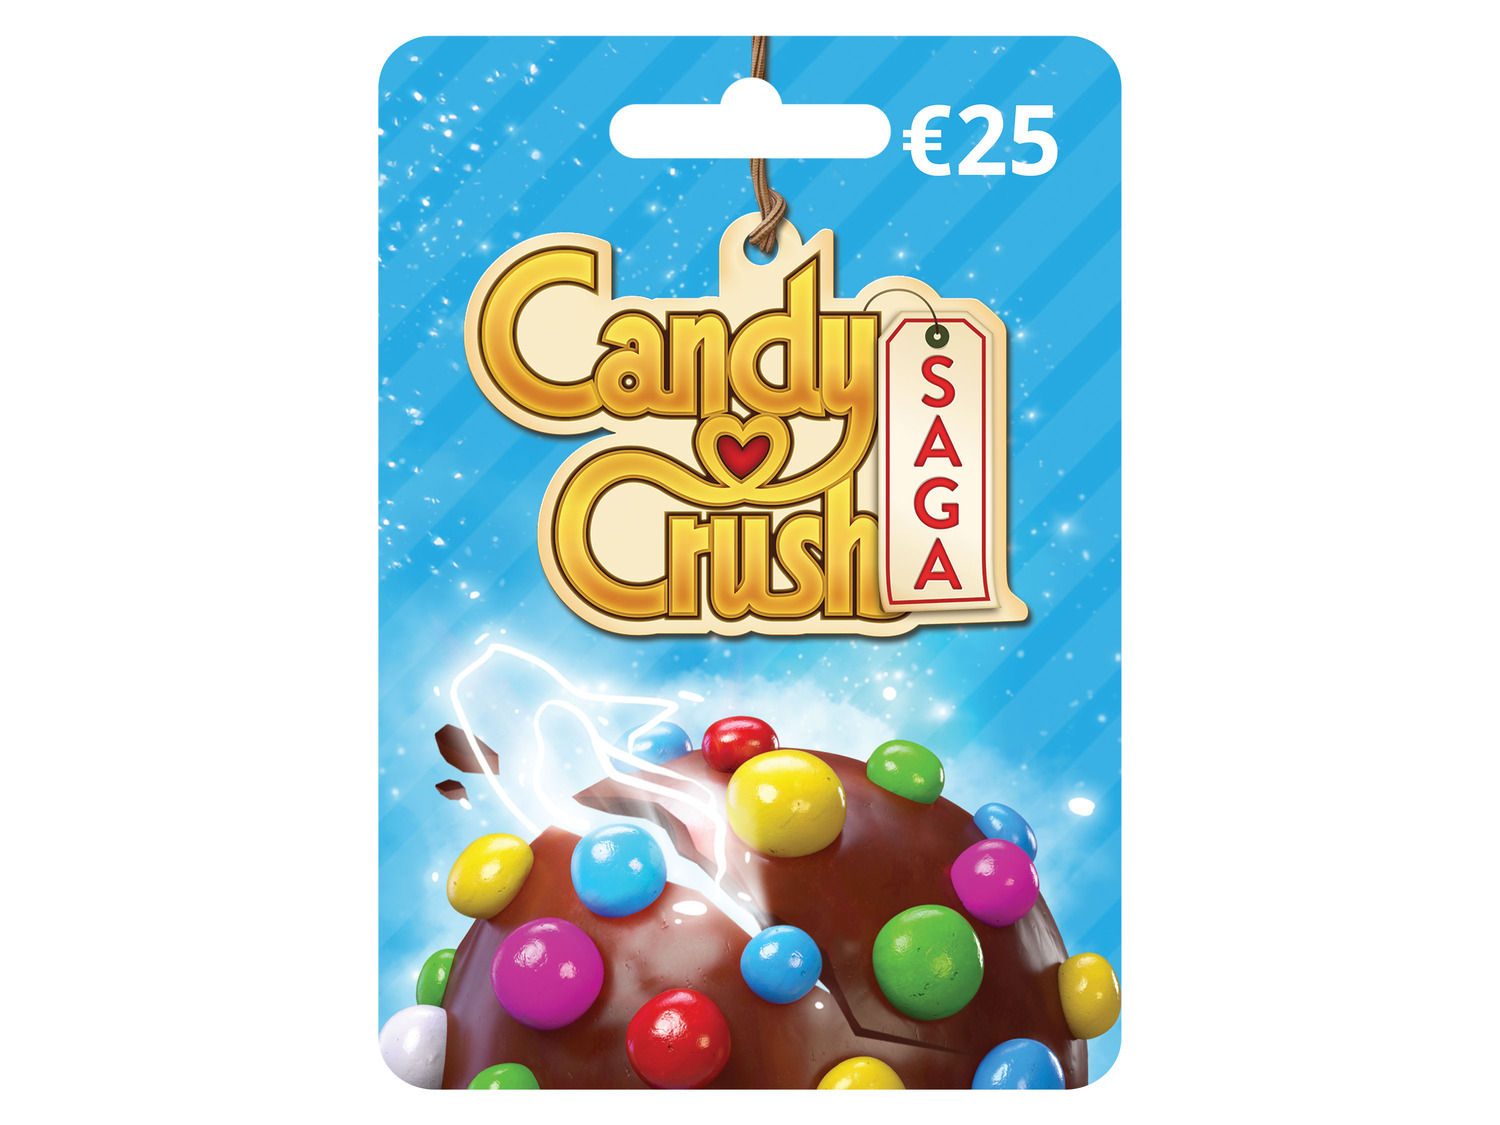 Candy Crush Gift Card 25 Euro online kaufen | LIDL